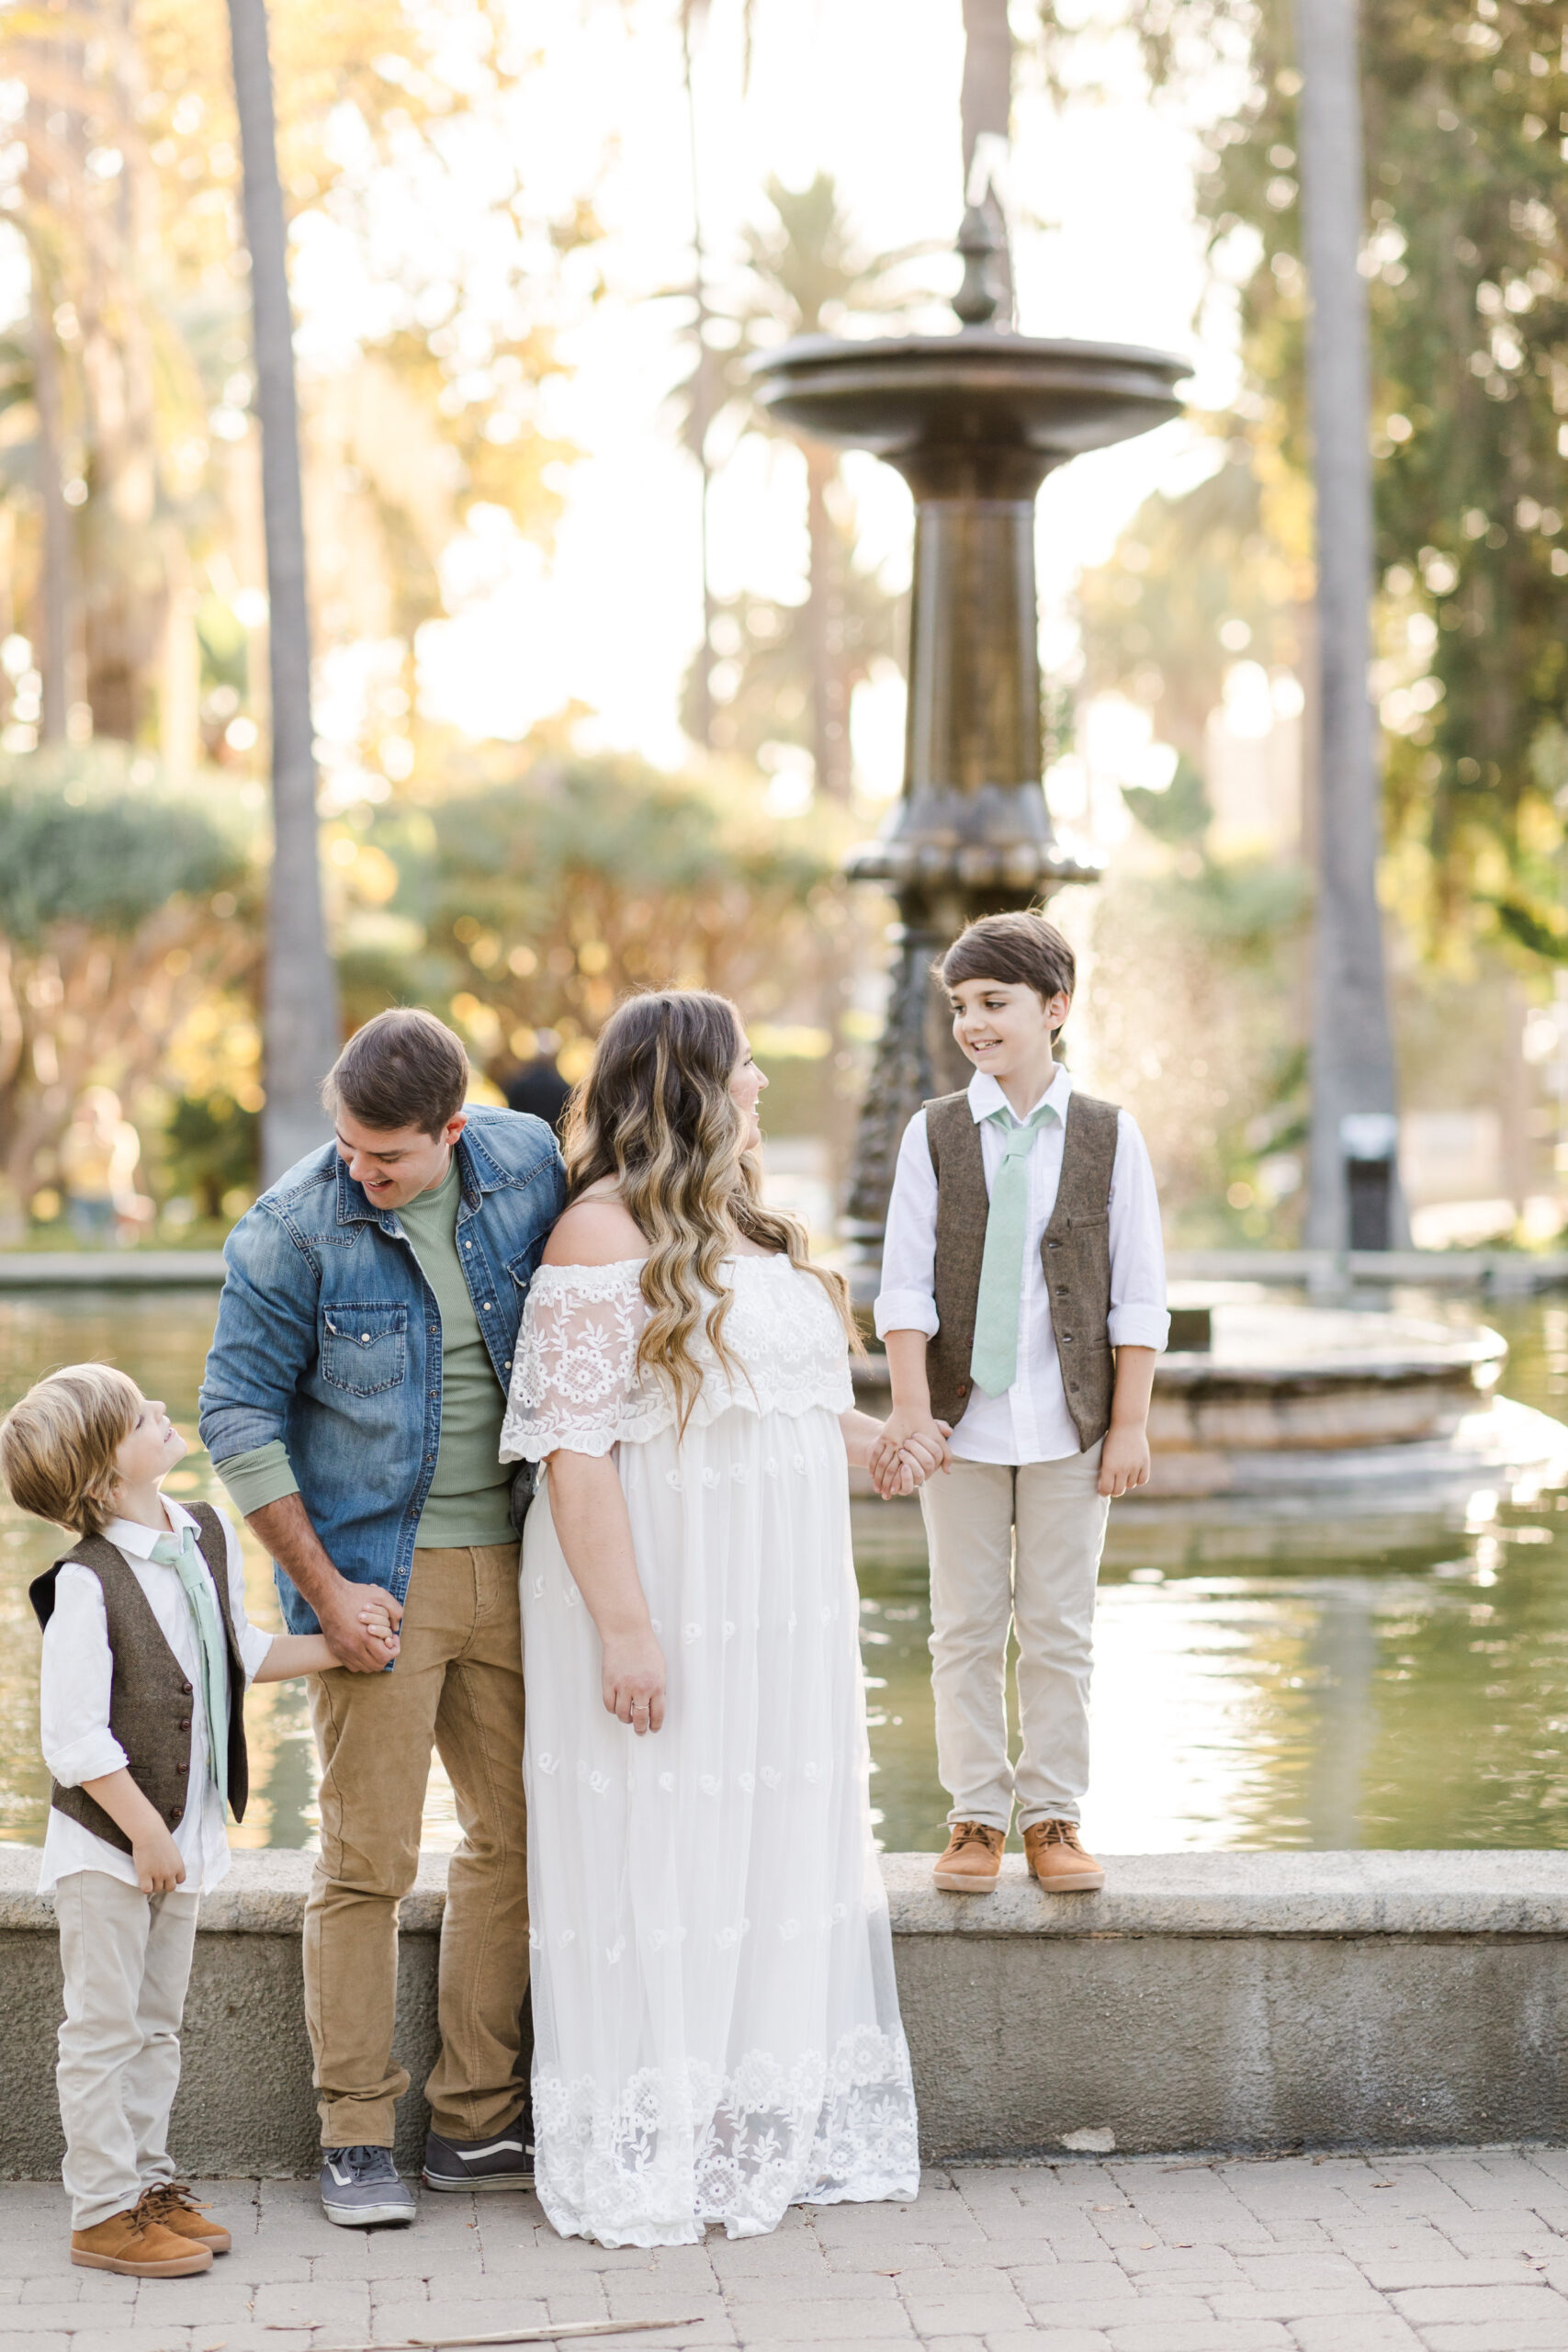 Family poses near fountain during golden hour in Beverly Hills, CA